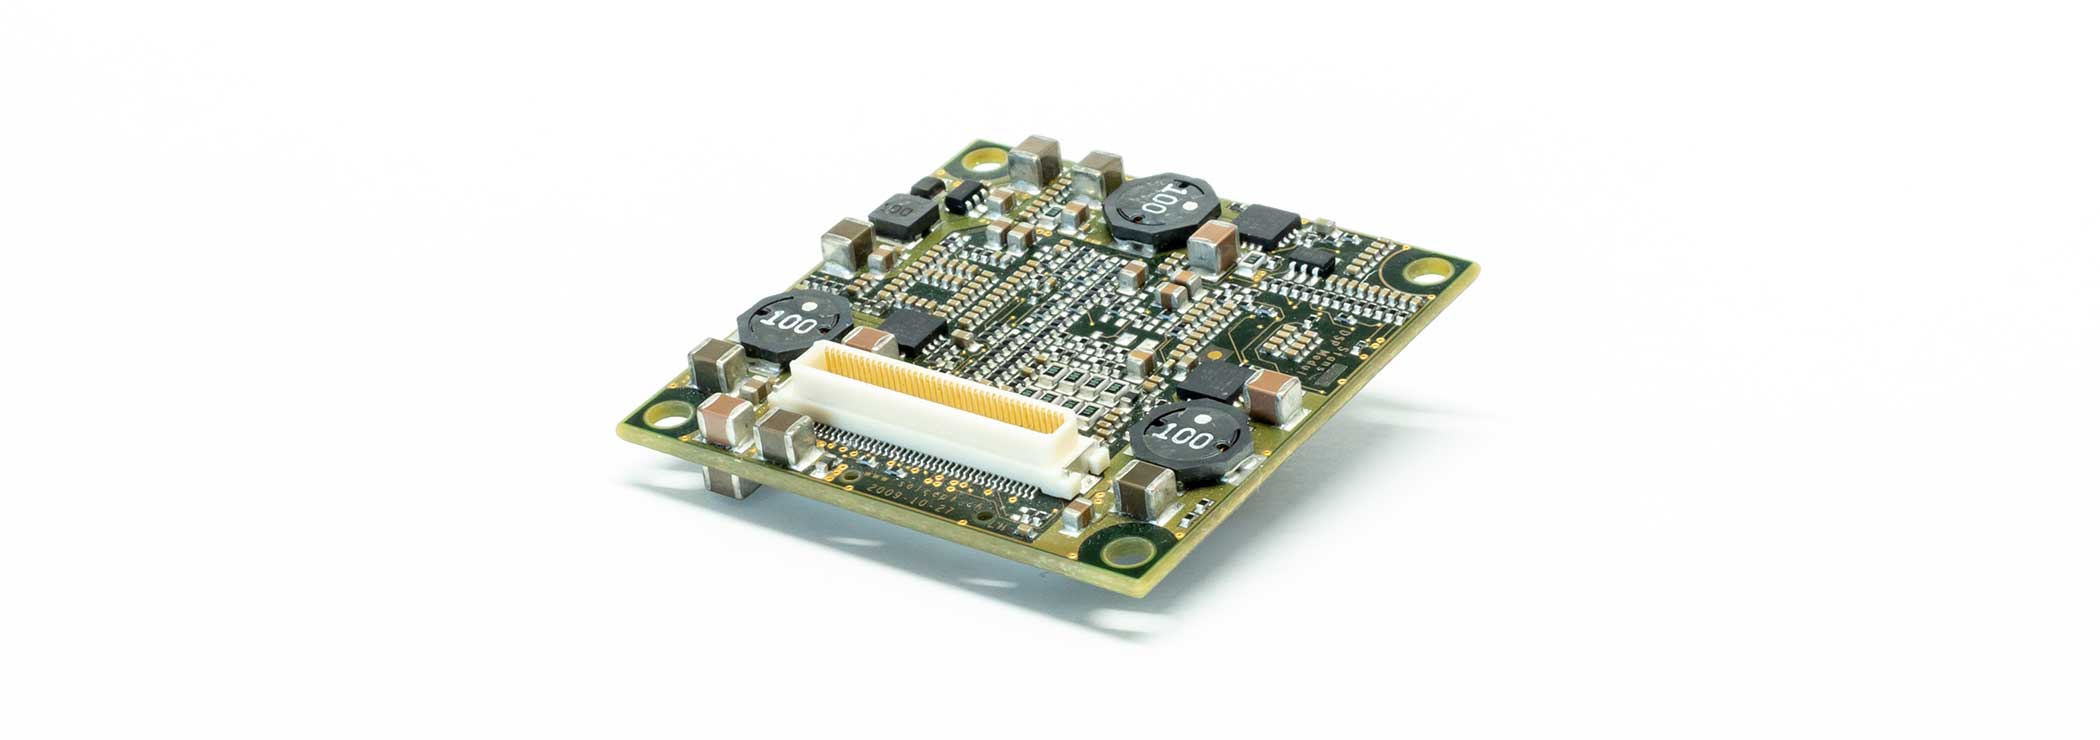 DSP board with with densely arranged components